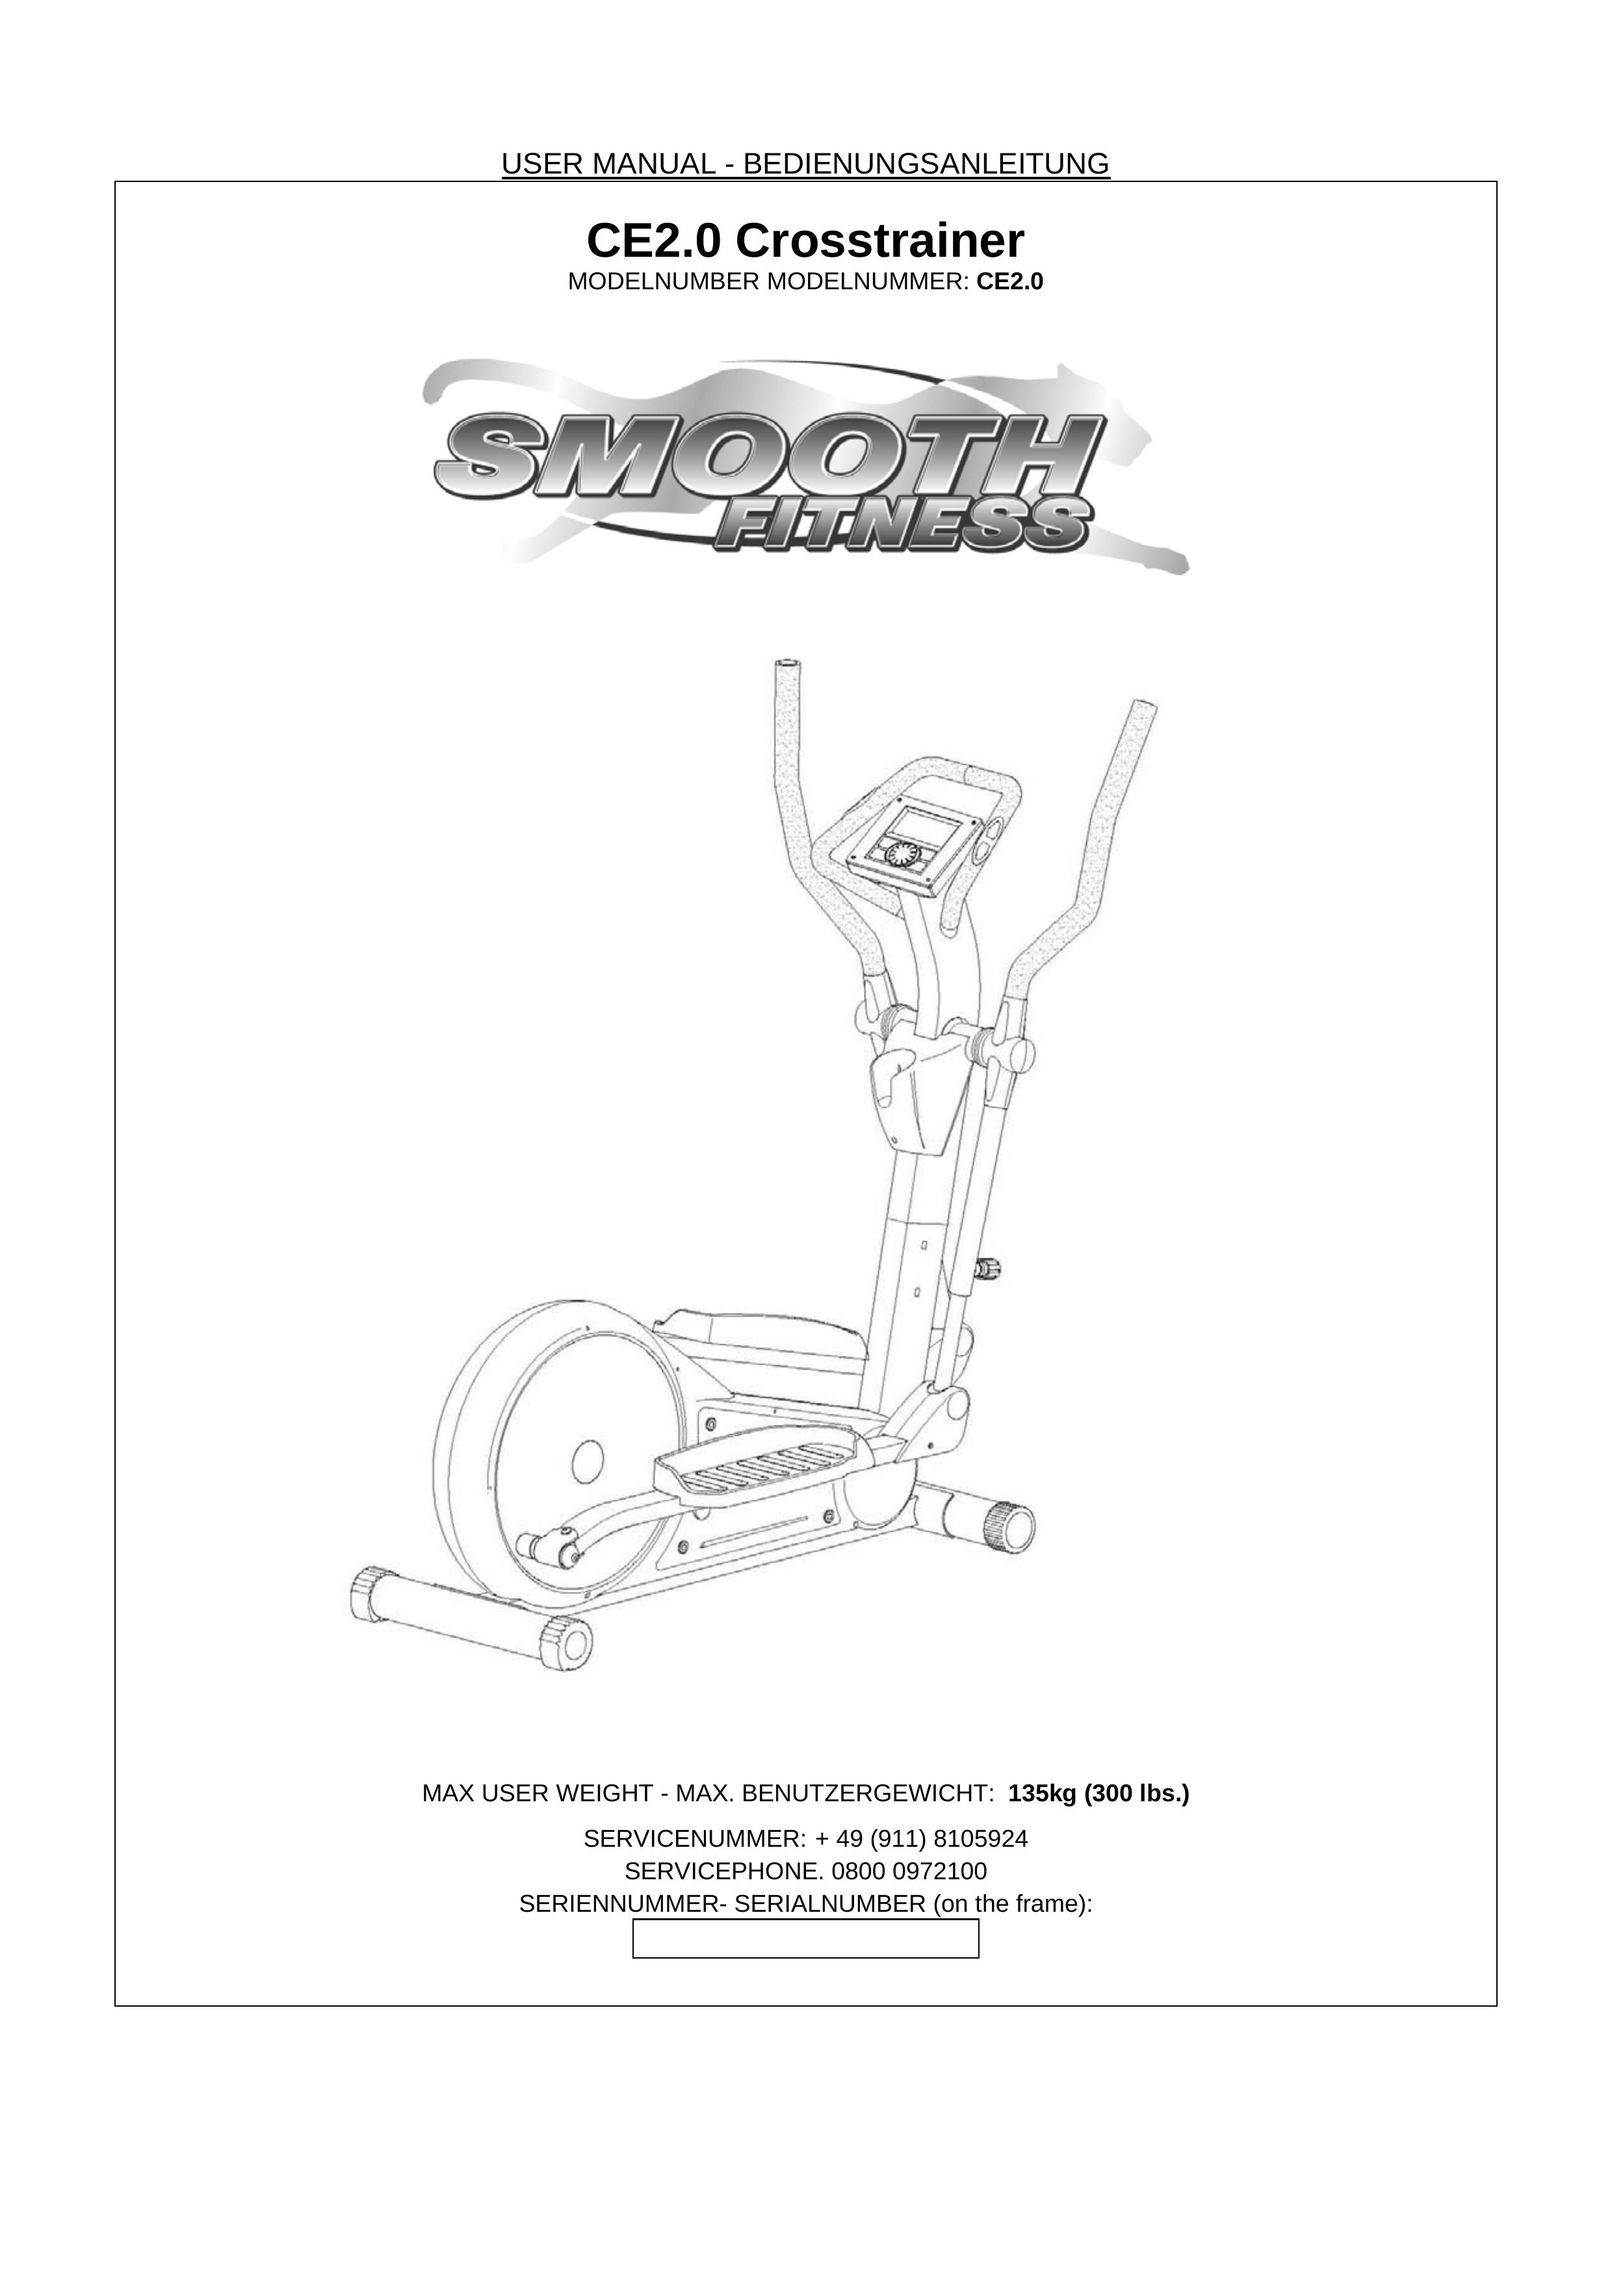 Smooth Fitness CE2.0 Elliptical Trainer User Manual